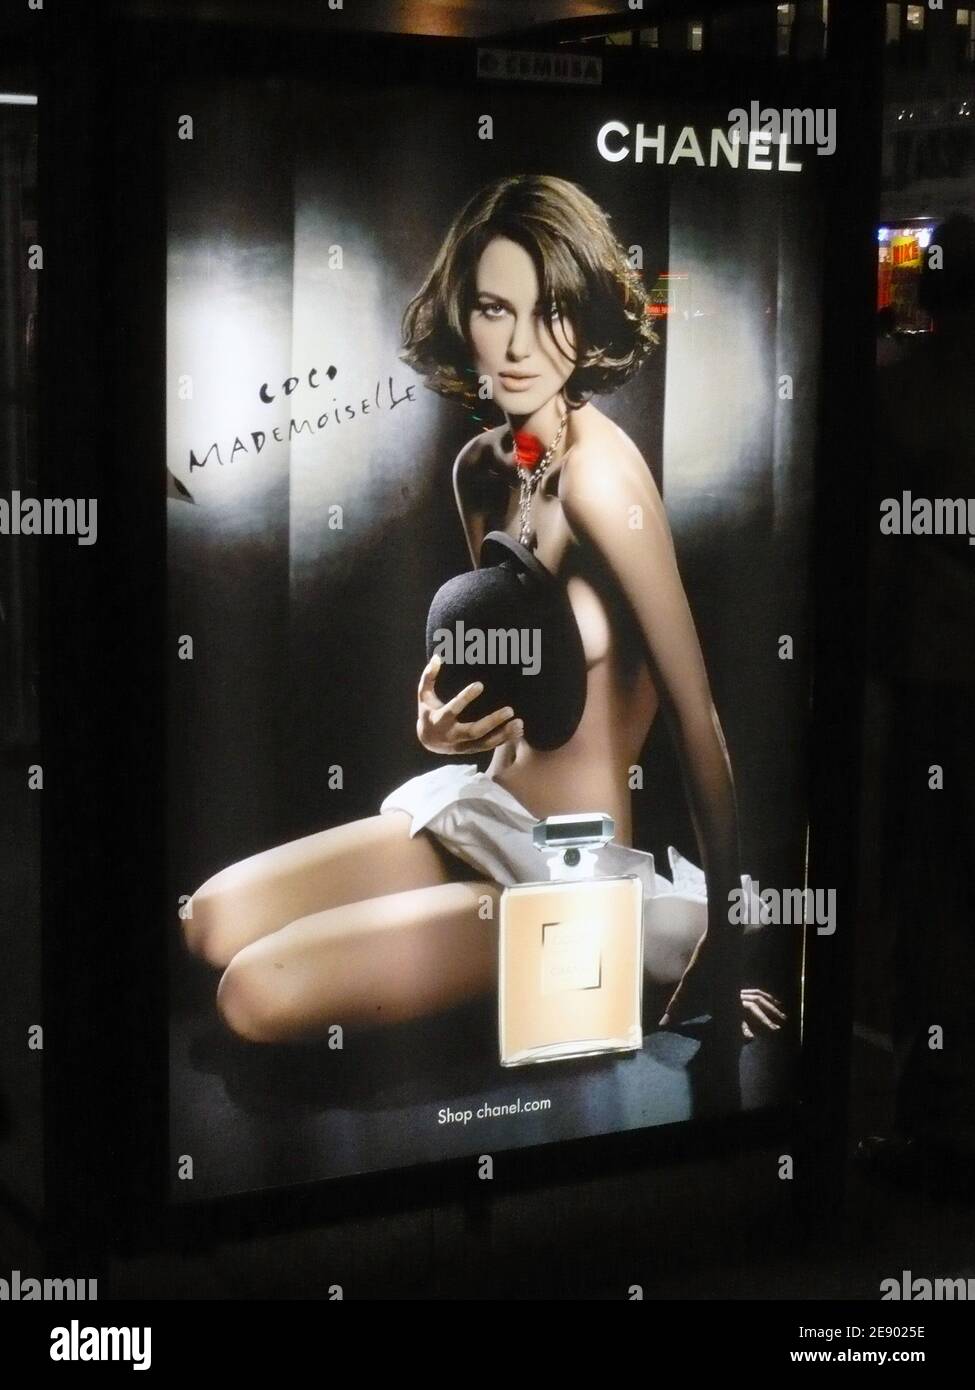 CHANEL 7, Chanel campaign featuring Keira Knightley. Click …